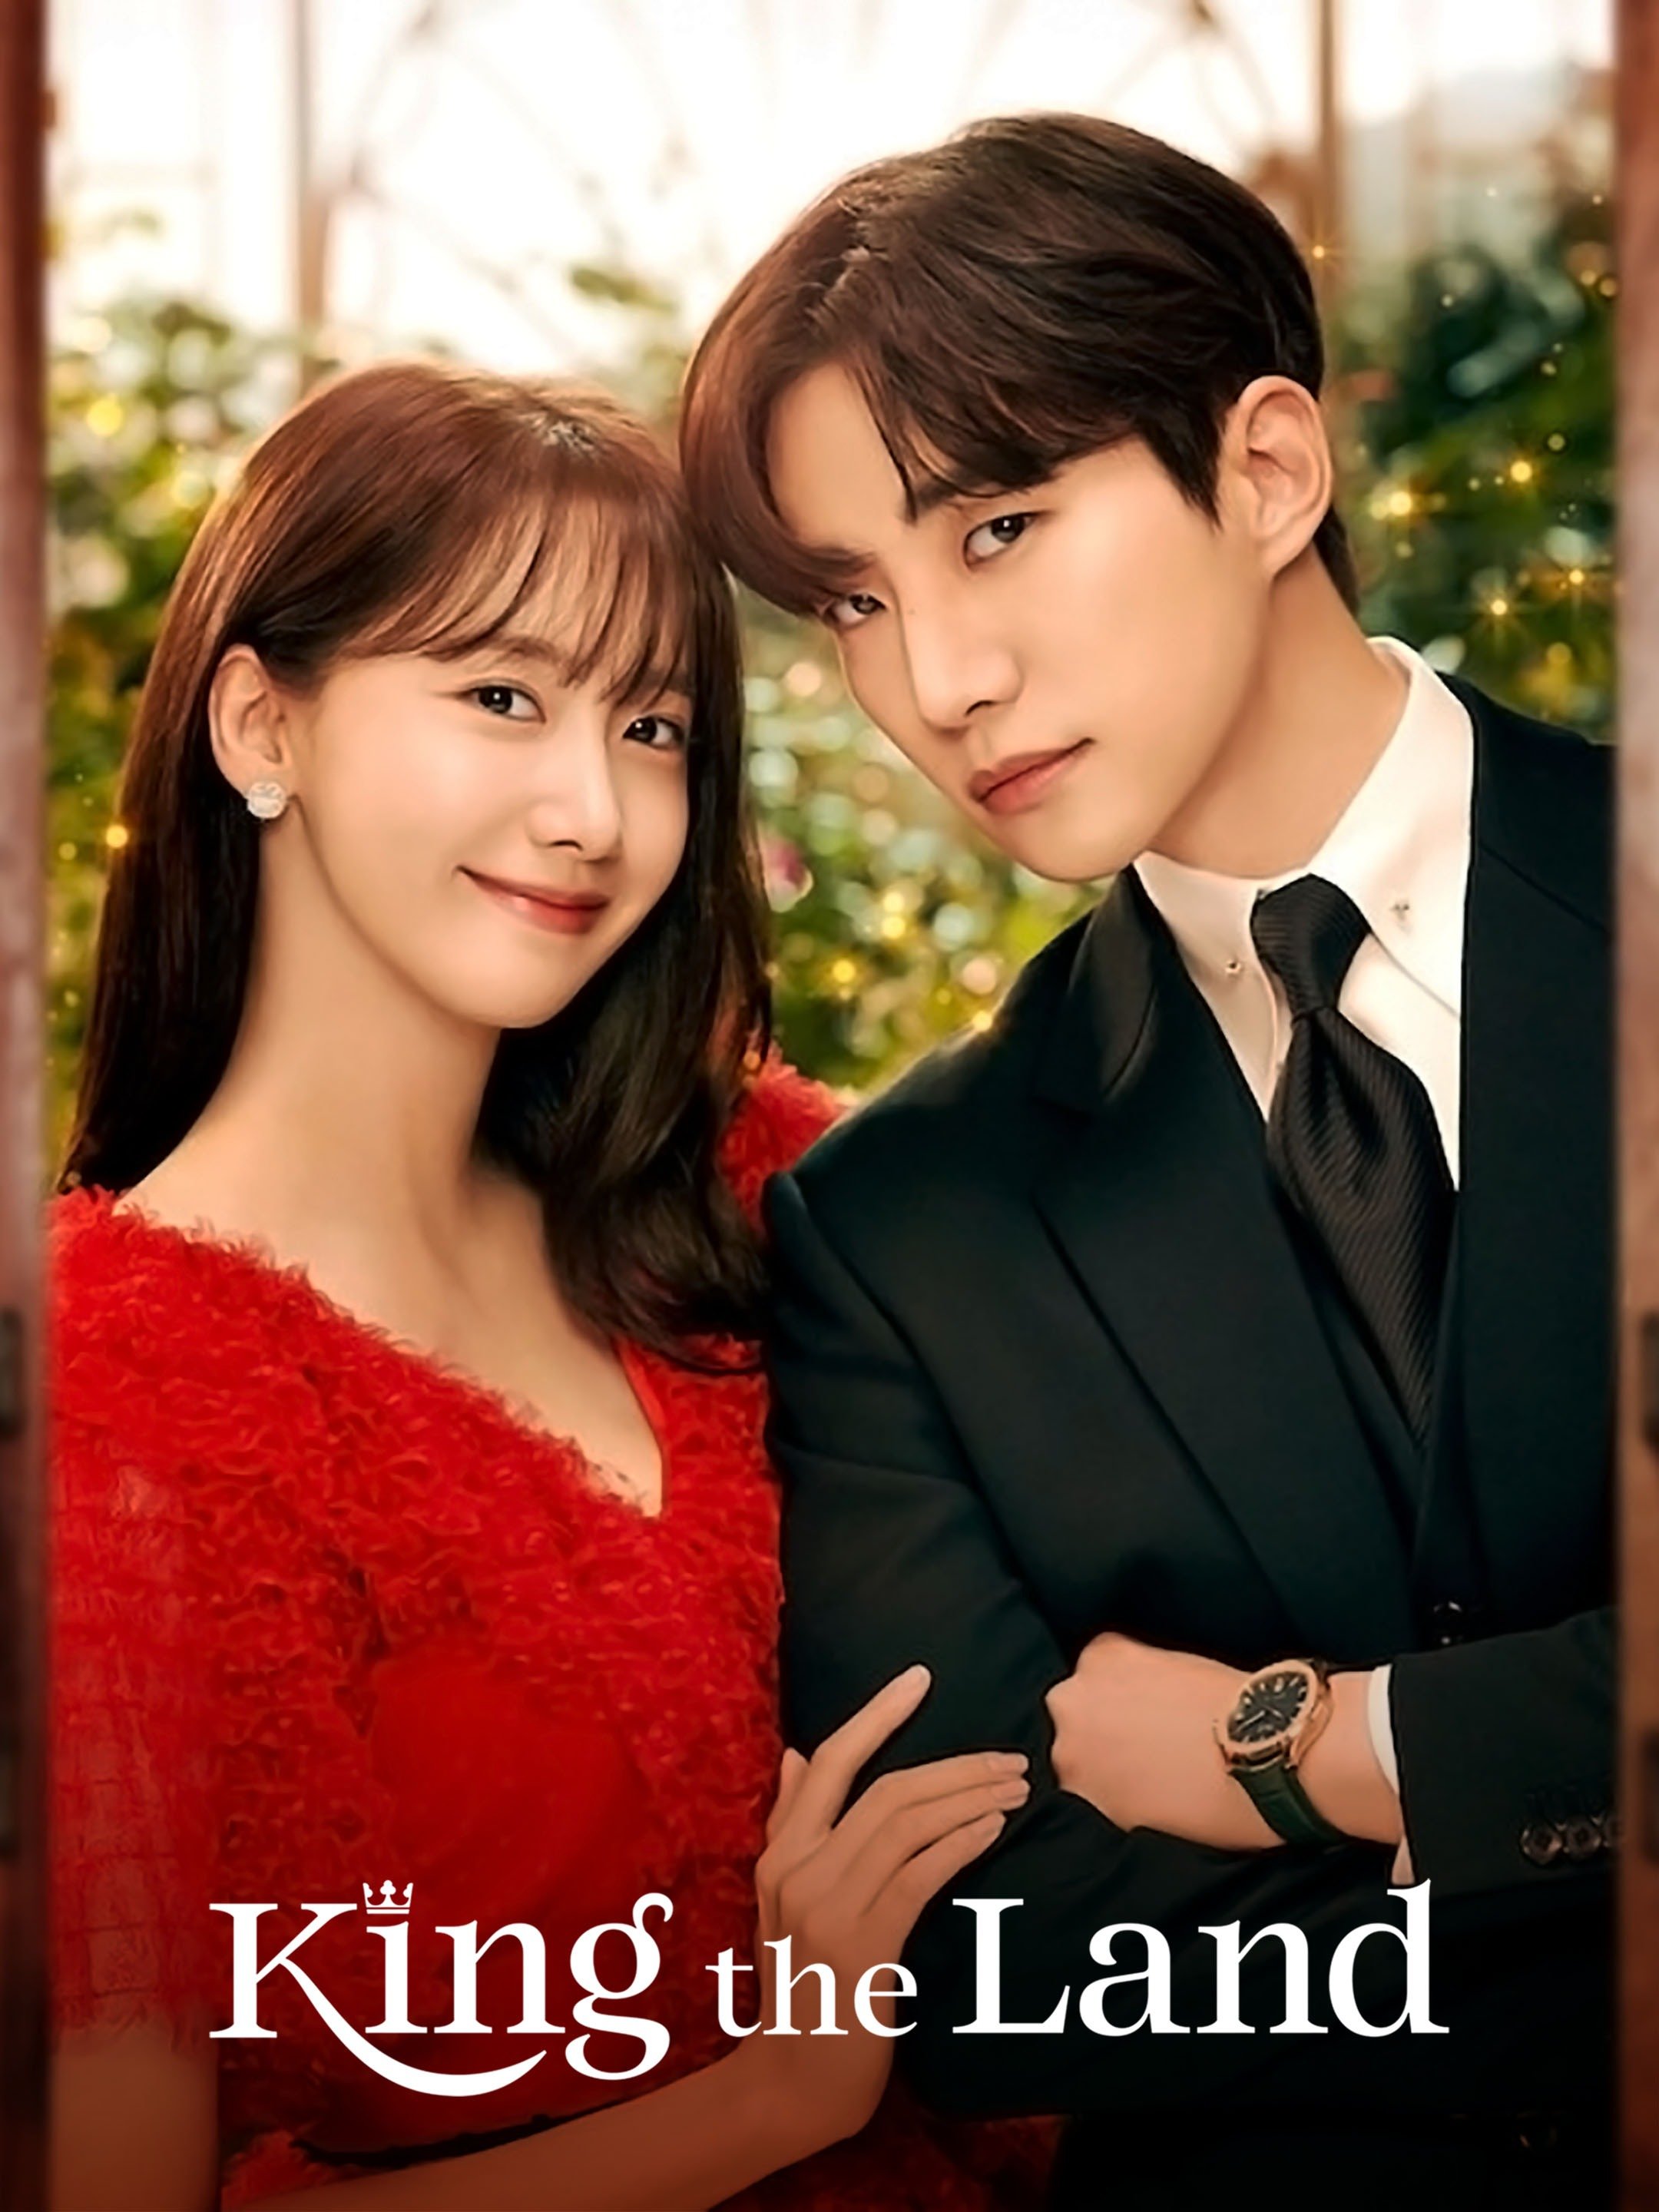 Yoona and Junho lean their heads toward each other in the promotional art for the Netflix show King the Land.